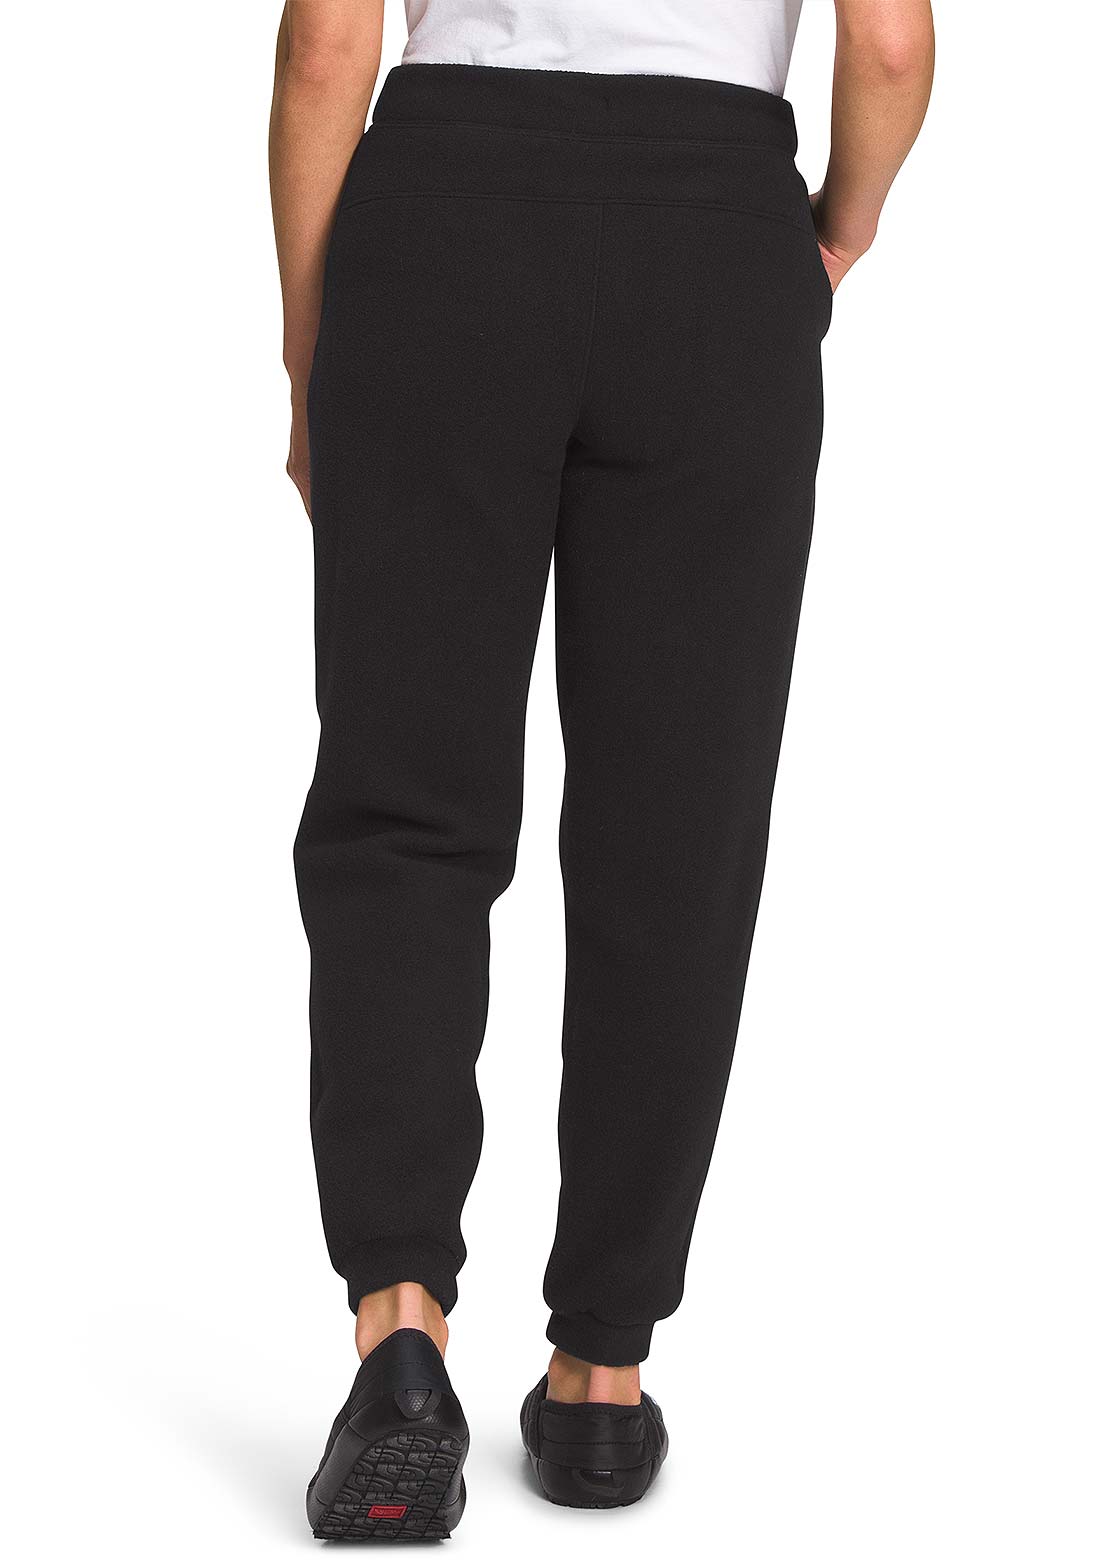 Northern Lights Joggers Women's Recycled Sweatpants With All-over